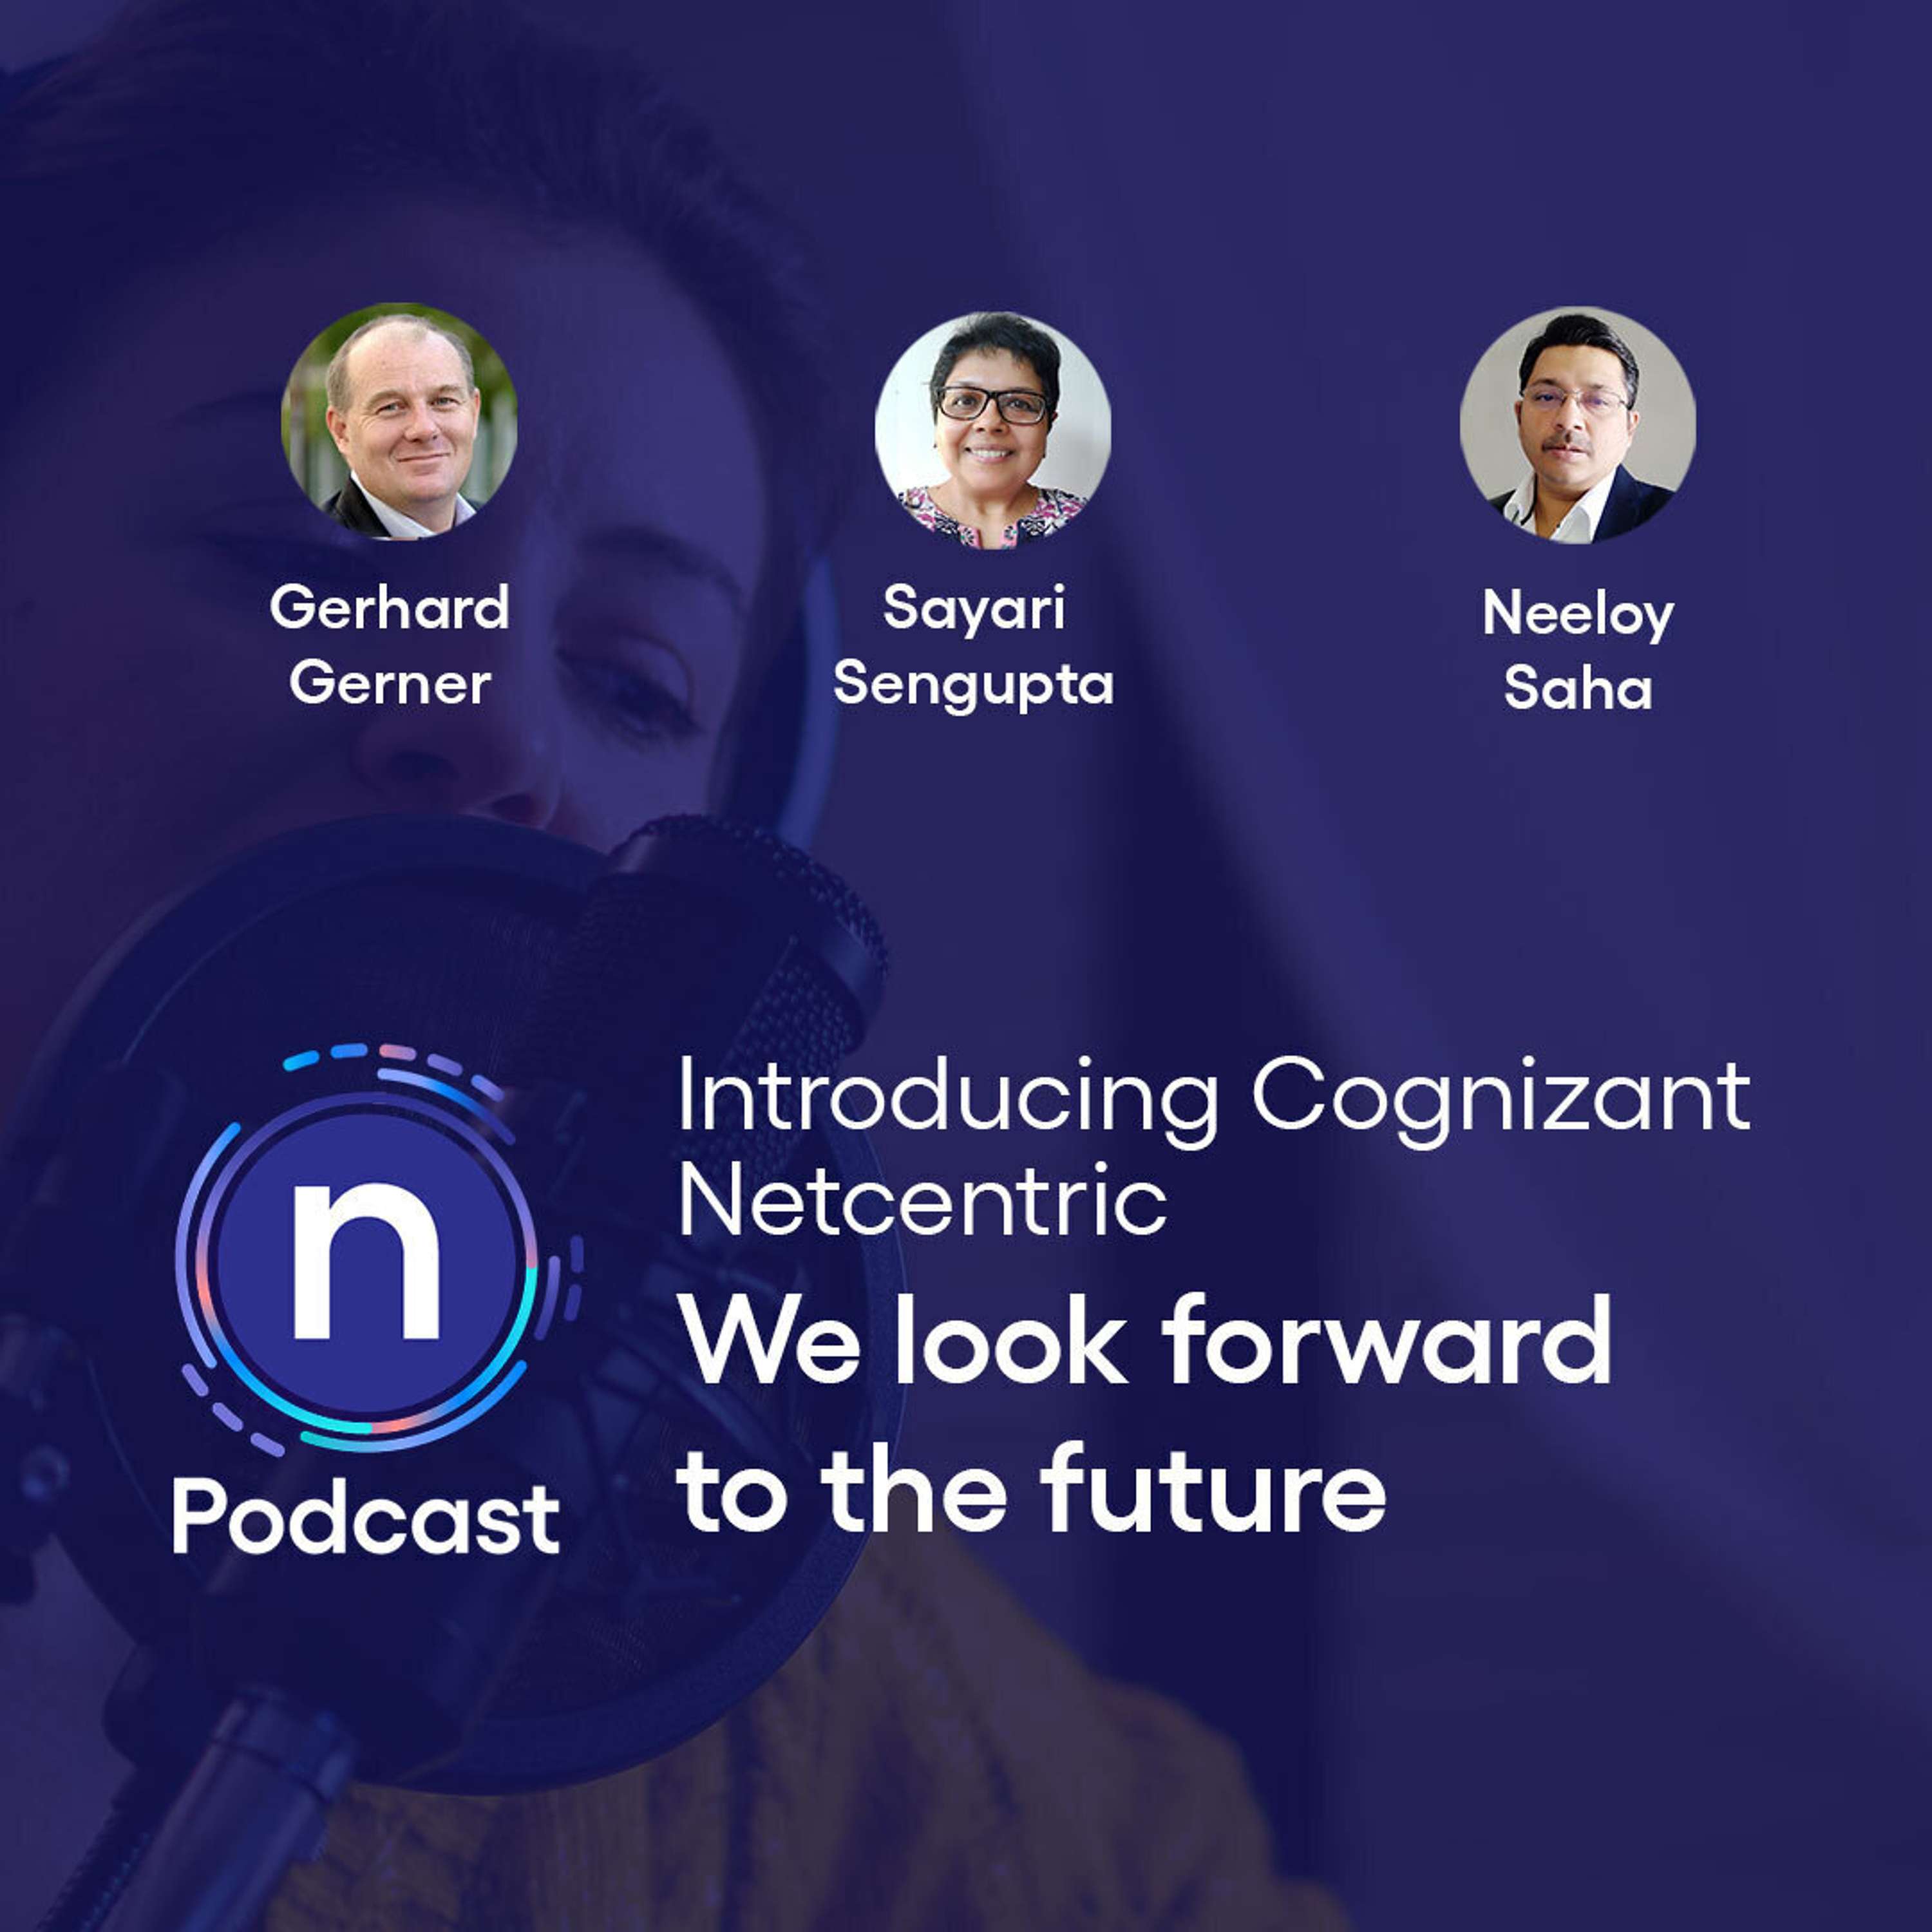 Introducing Cognizant Netcentric: We look forward to the future